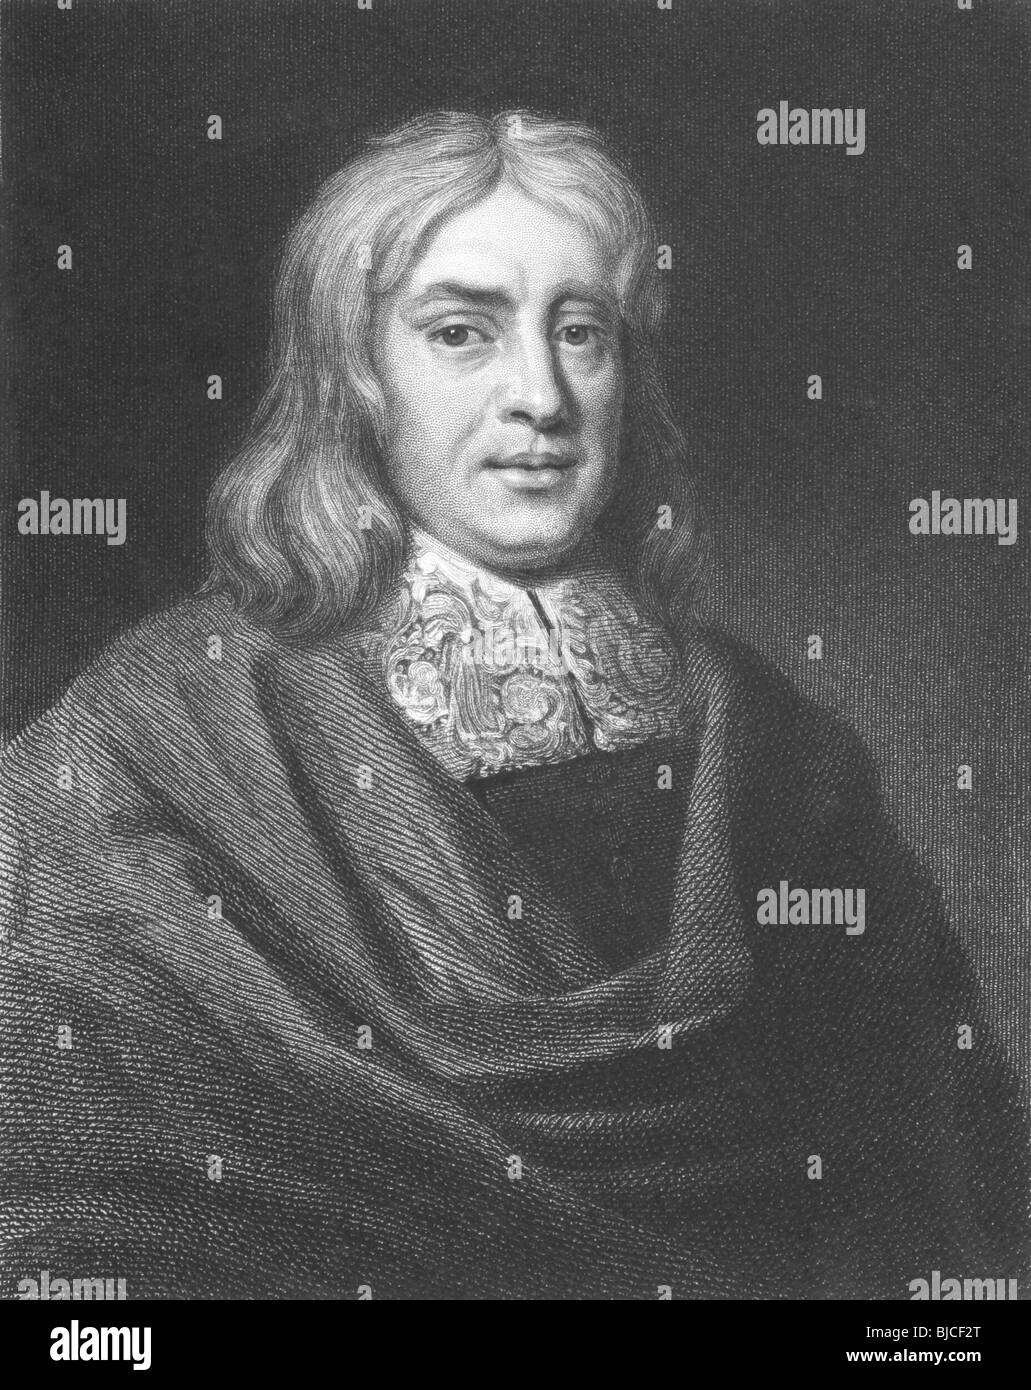 Thomas Sydenham (1624-1689) on engraving from the 1800s. English physician also known as ''The English Hippocrates''. Stock Photo